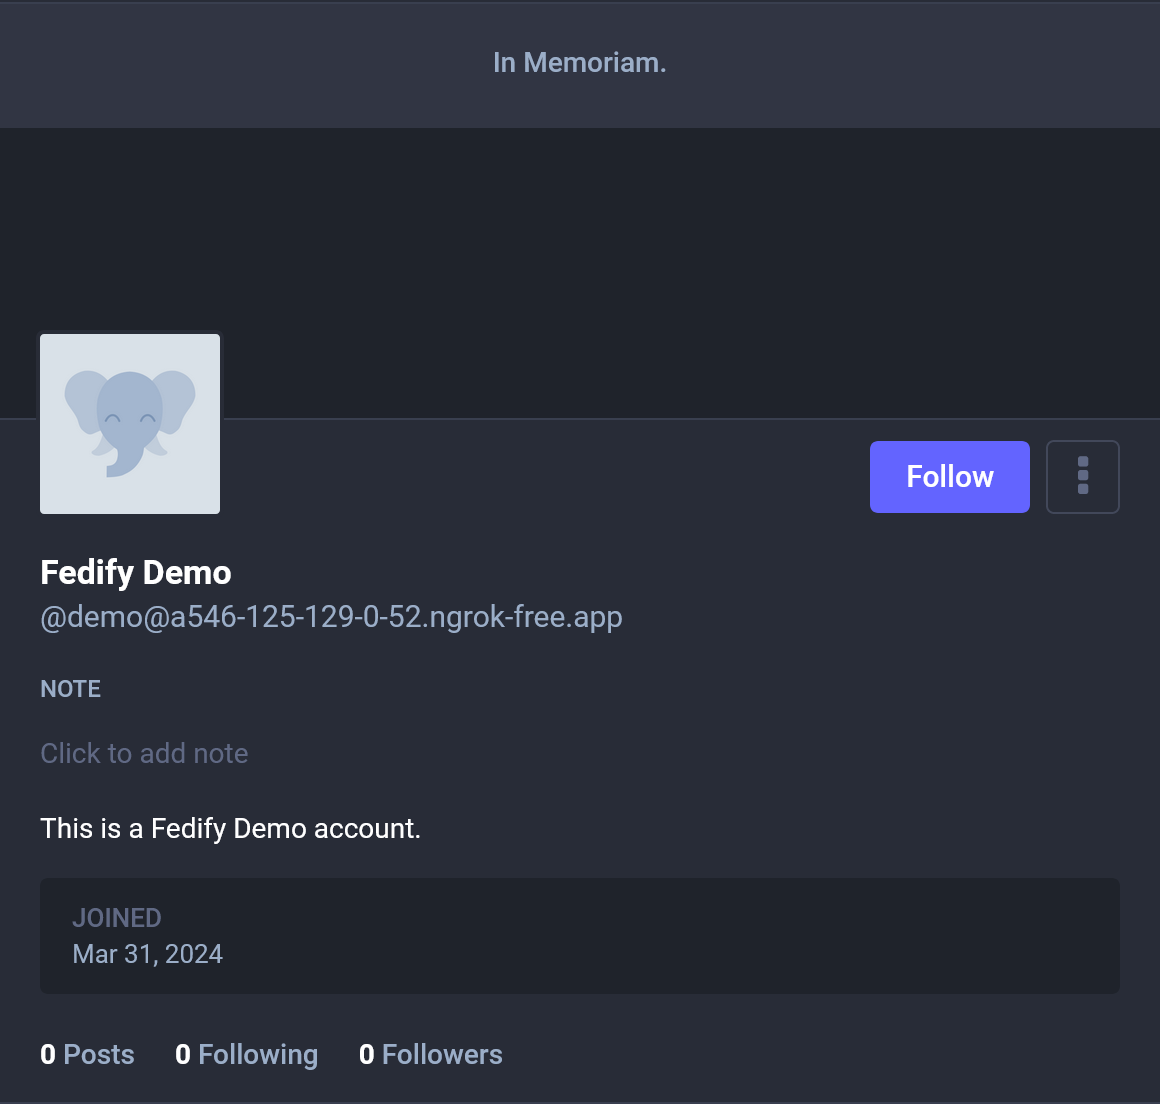 Screenshot: An actor profile with a memorialized status in
Mastodon